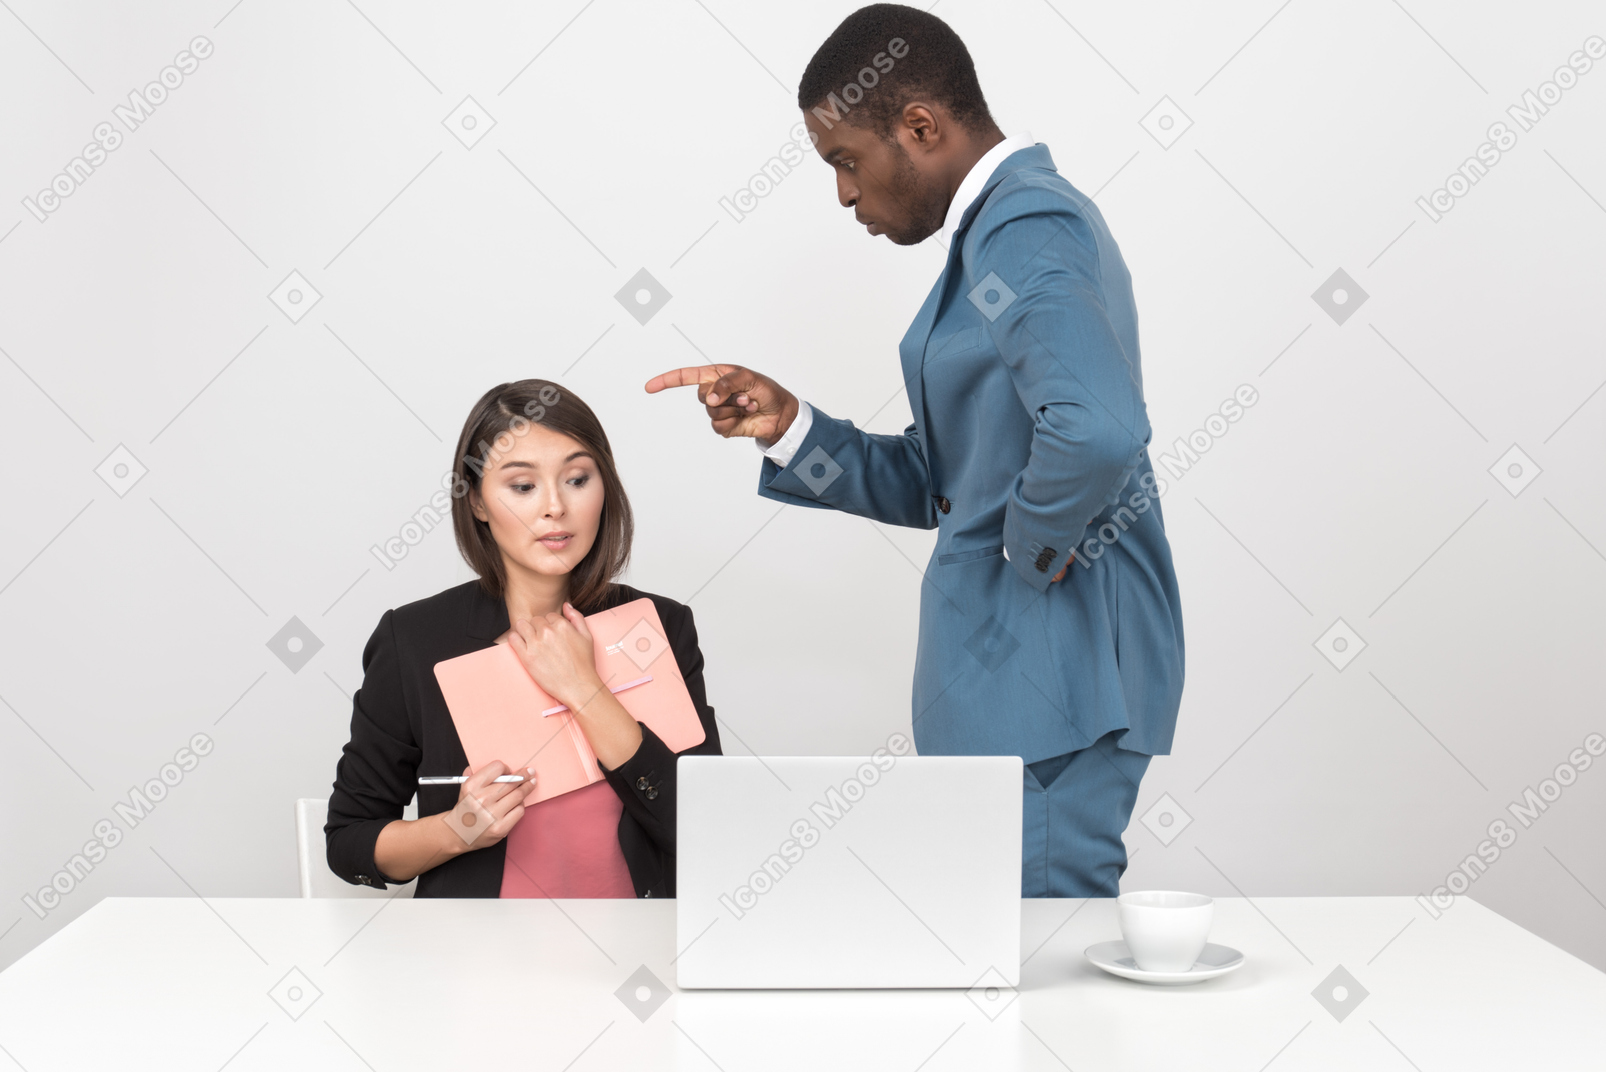 Boss is unsatisfied with employee's work and telling her off